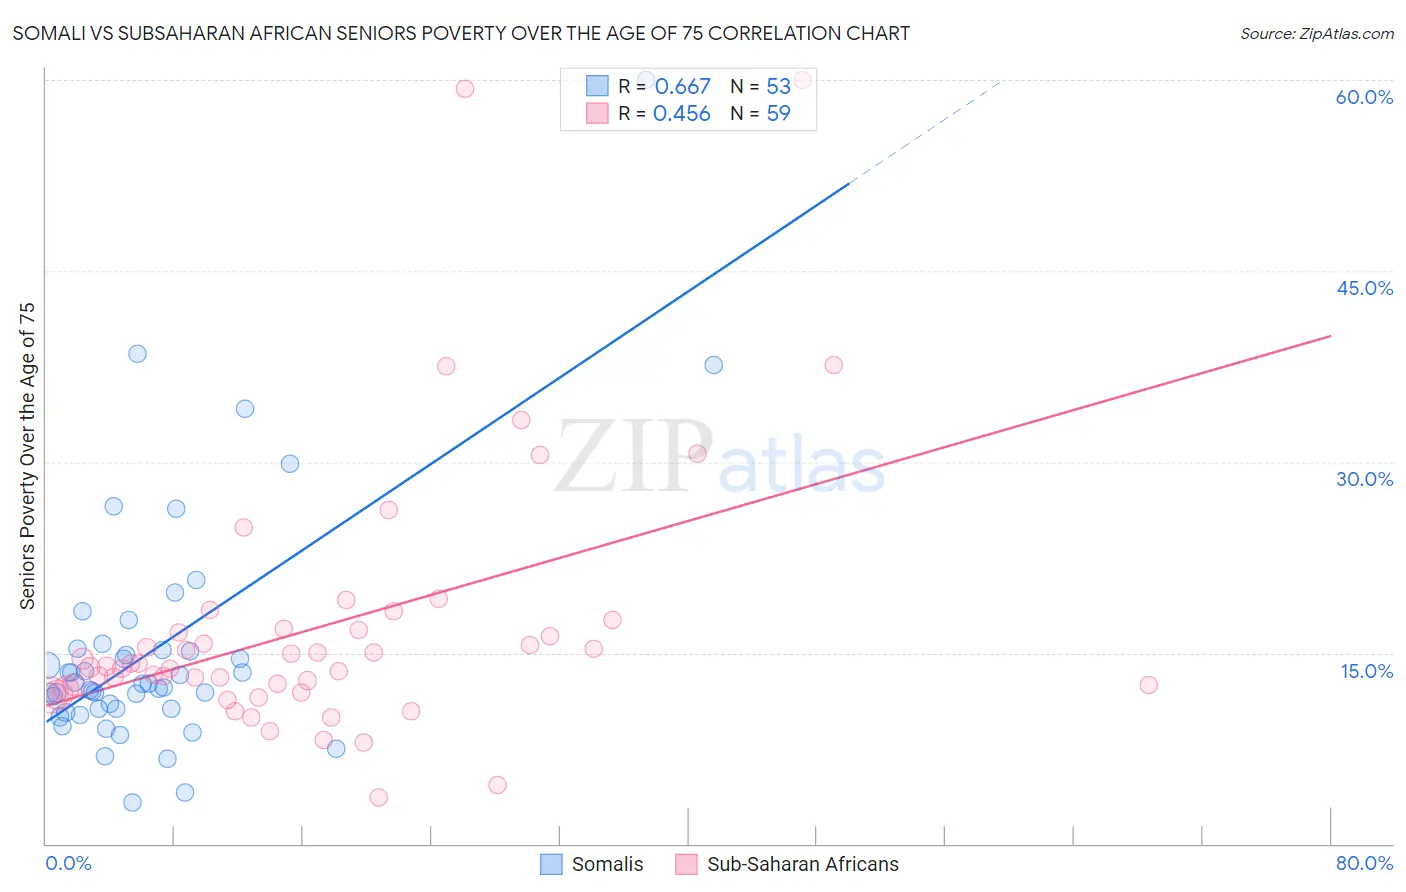 Somali vs Subsaharan African Seniors Poverty Over the Age of 75